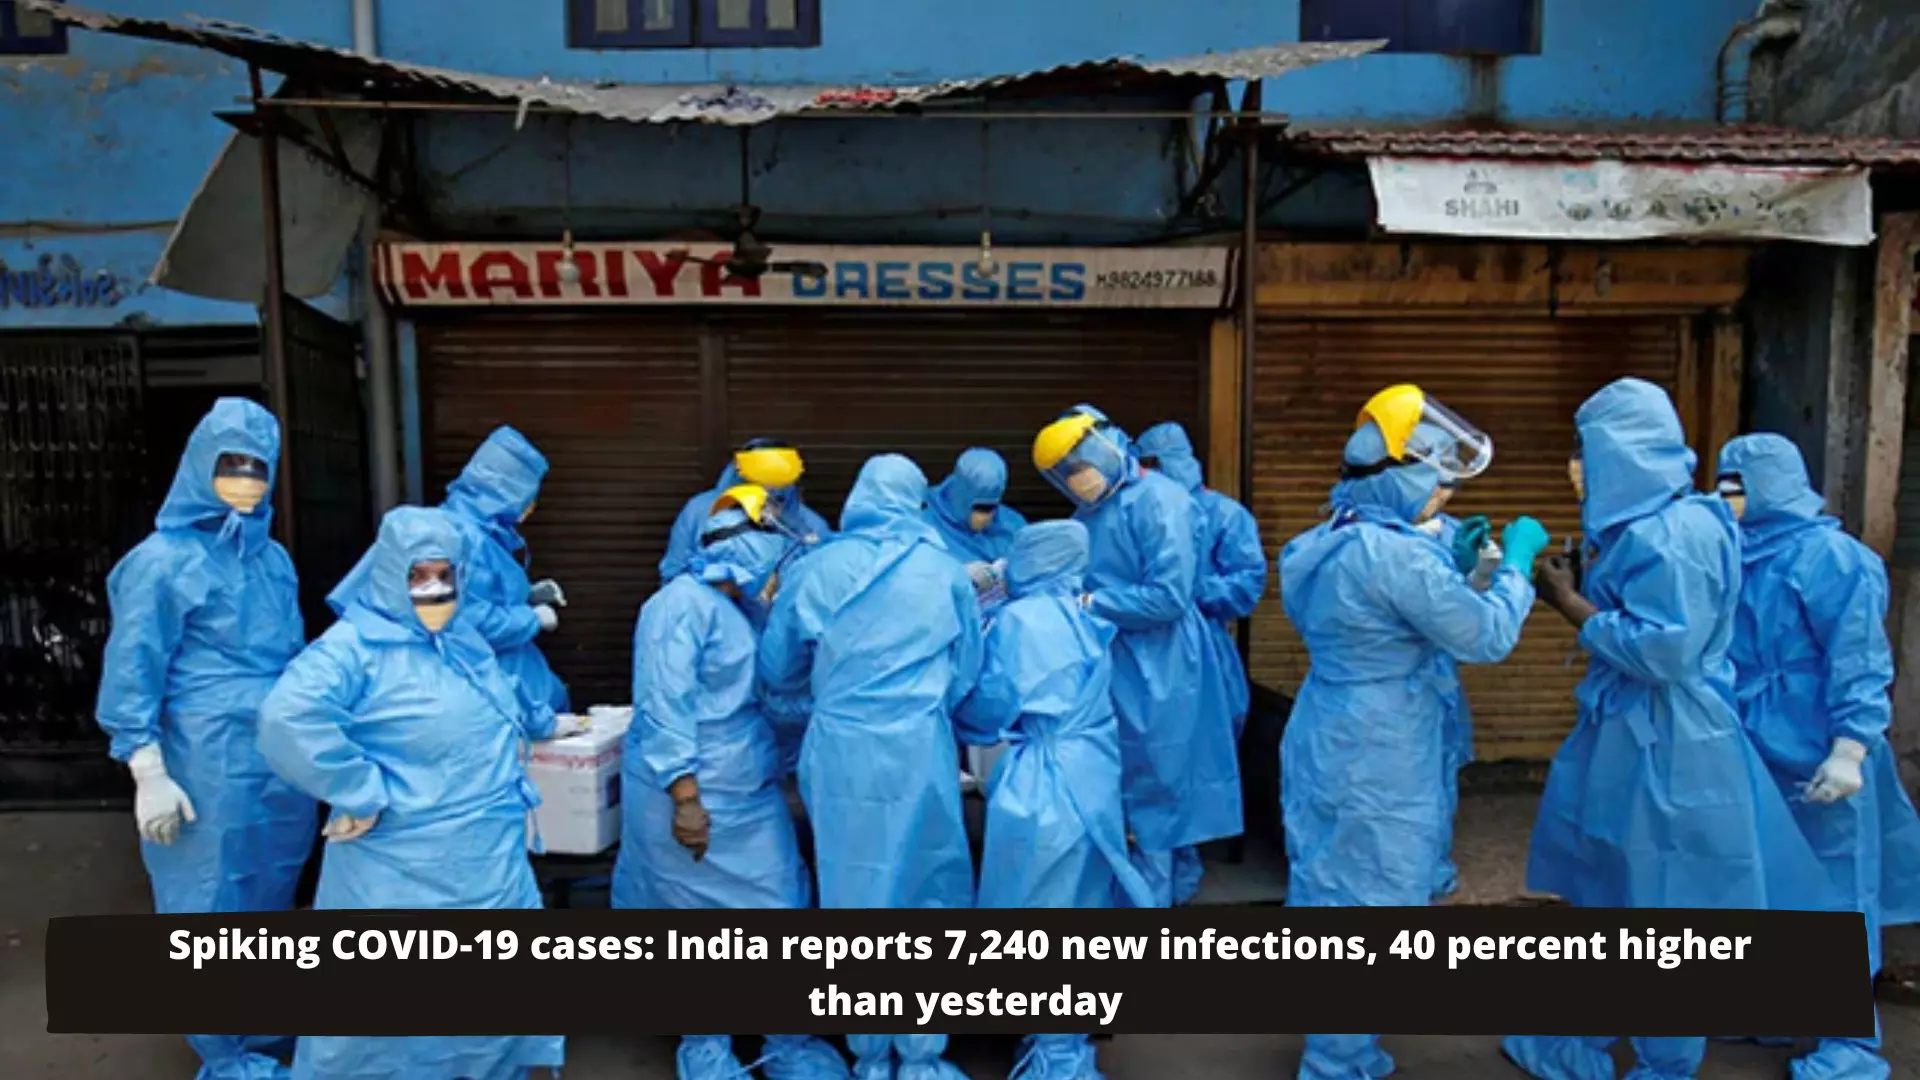 Spiking coronavirus cases: India reports 7,240 new infections, 40 percent higher than yesterday